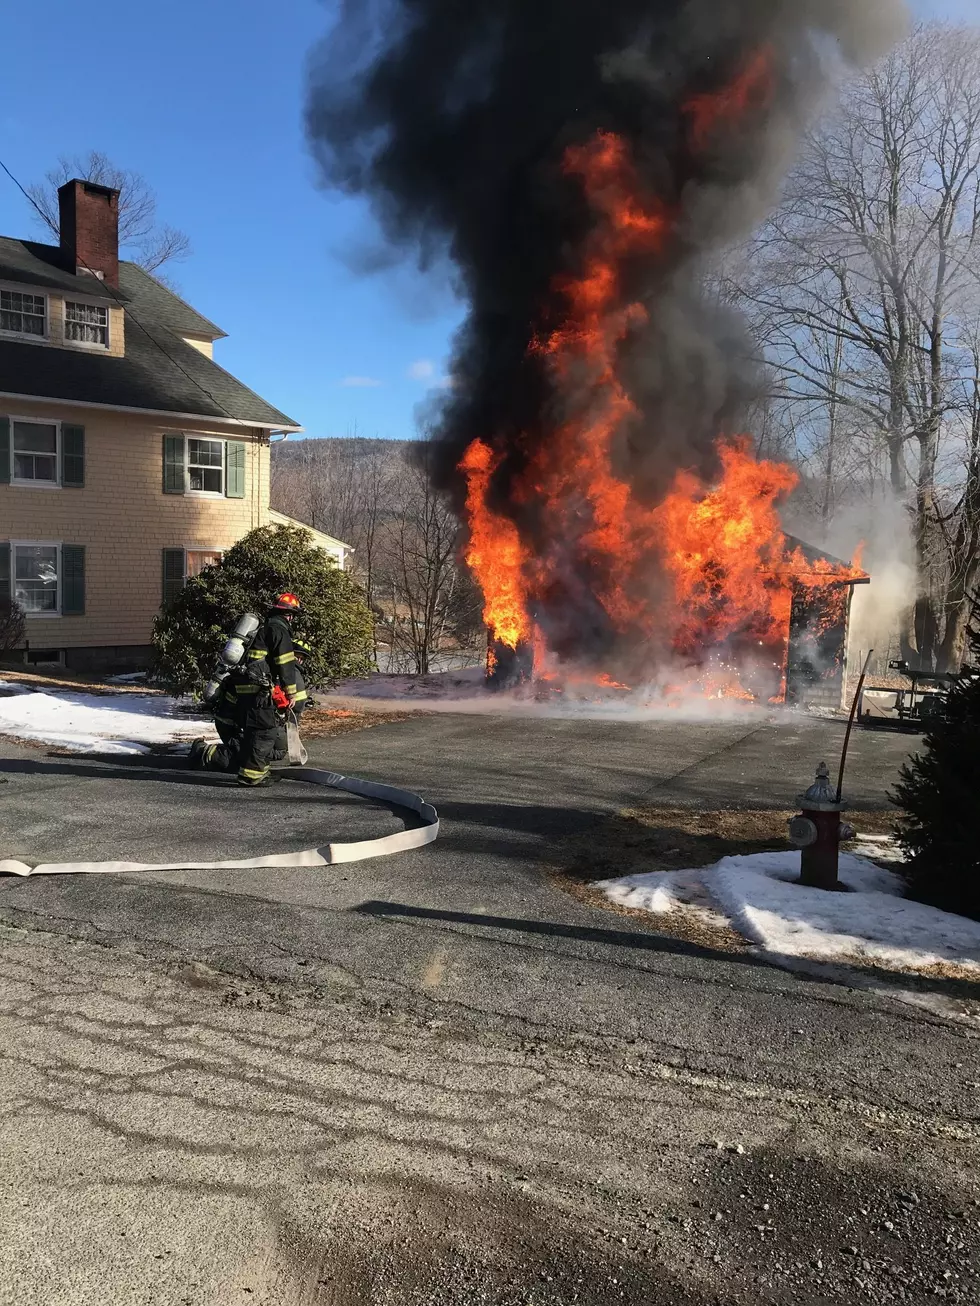 GB Fire Dept. Extinguishes Garage Fire at Home (photos)